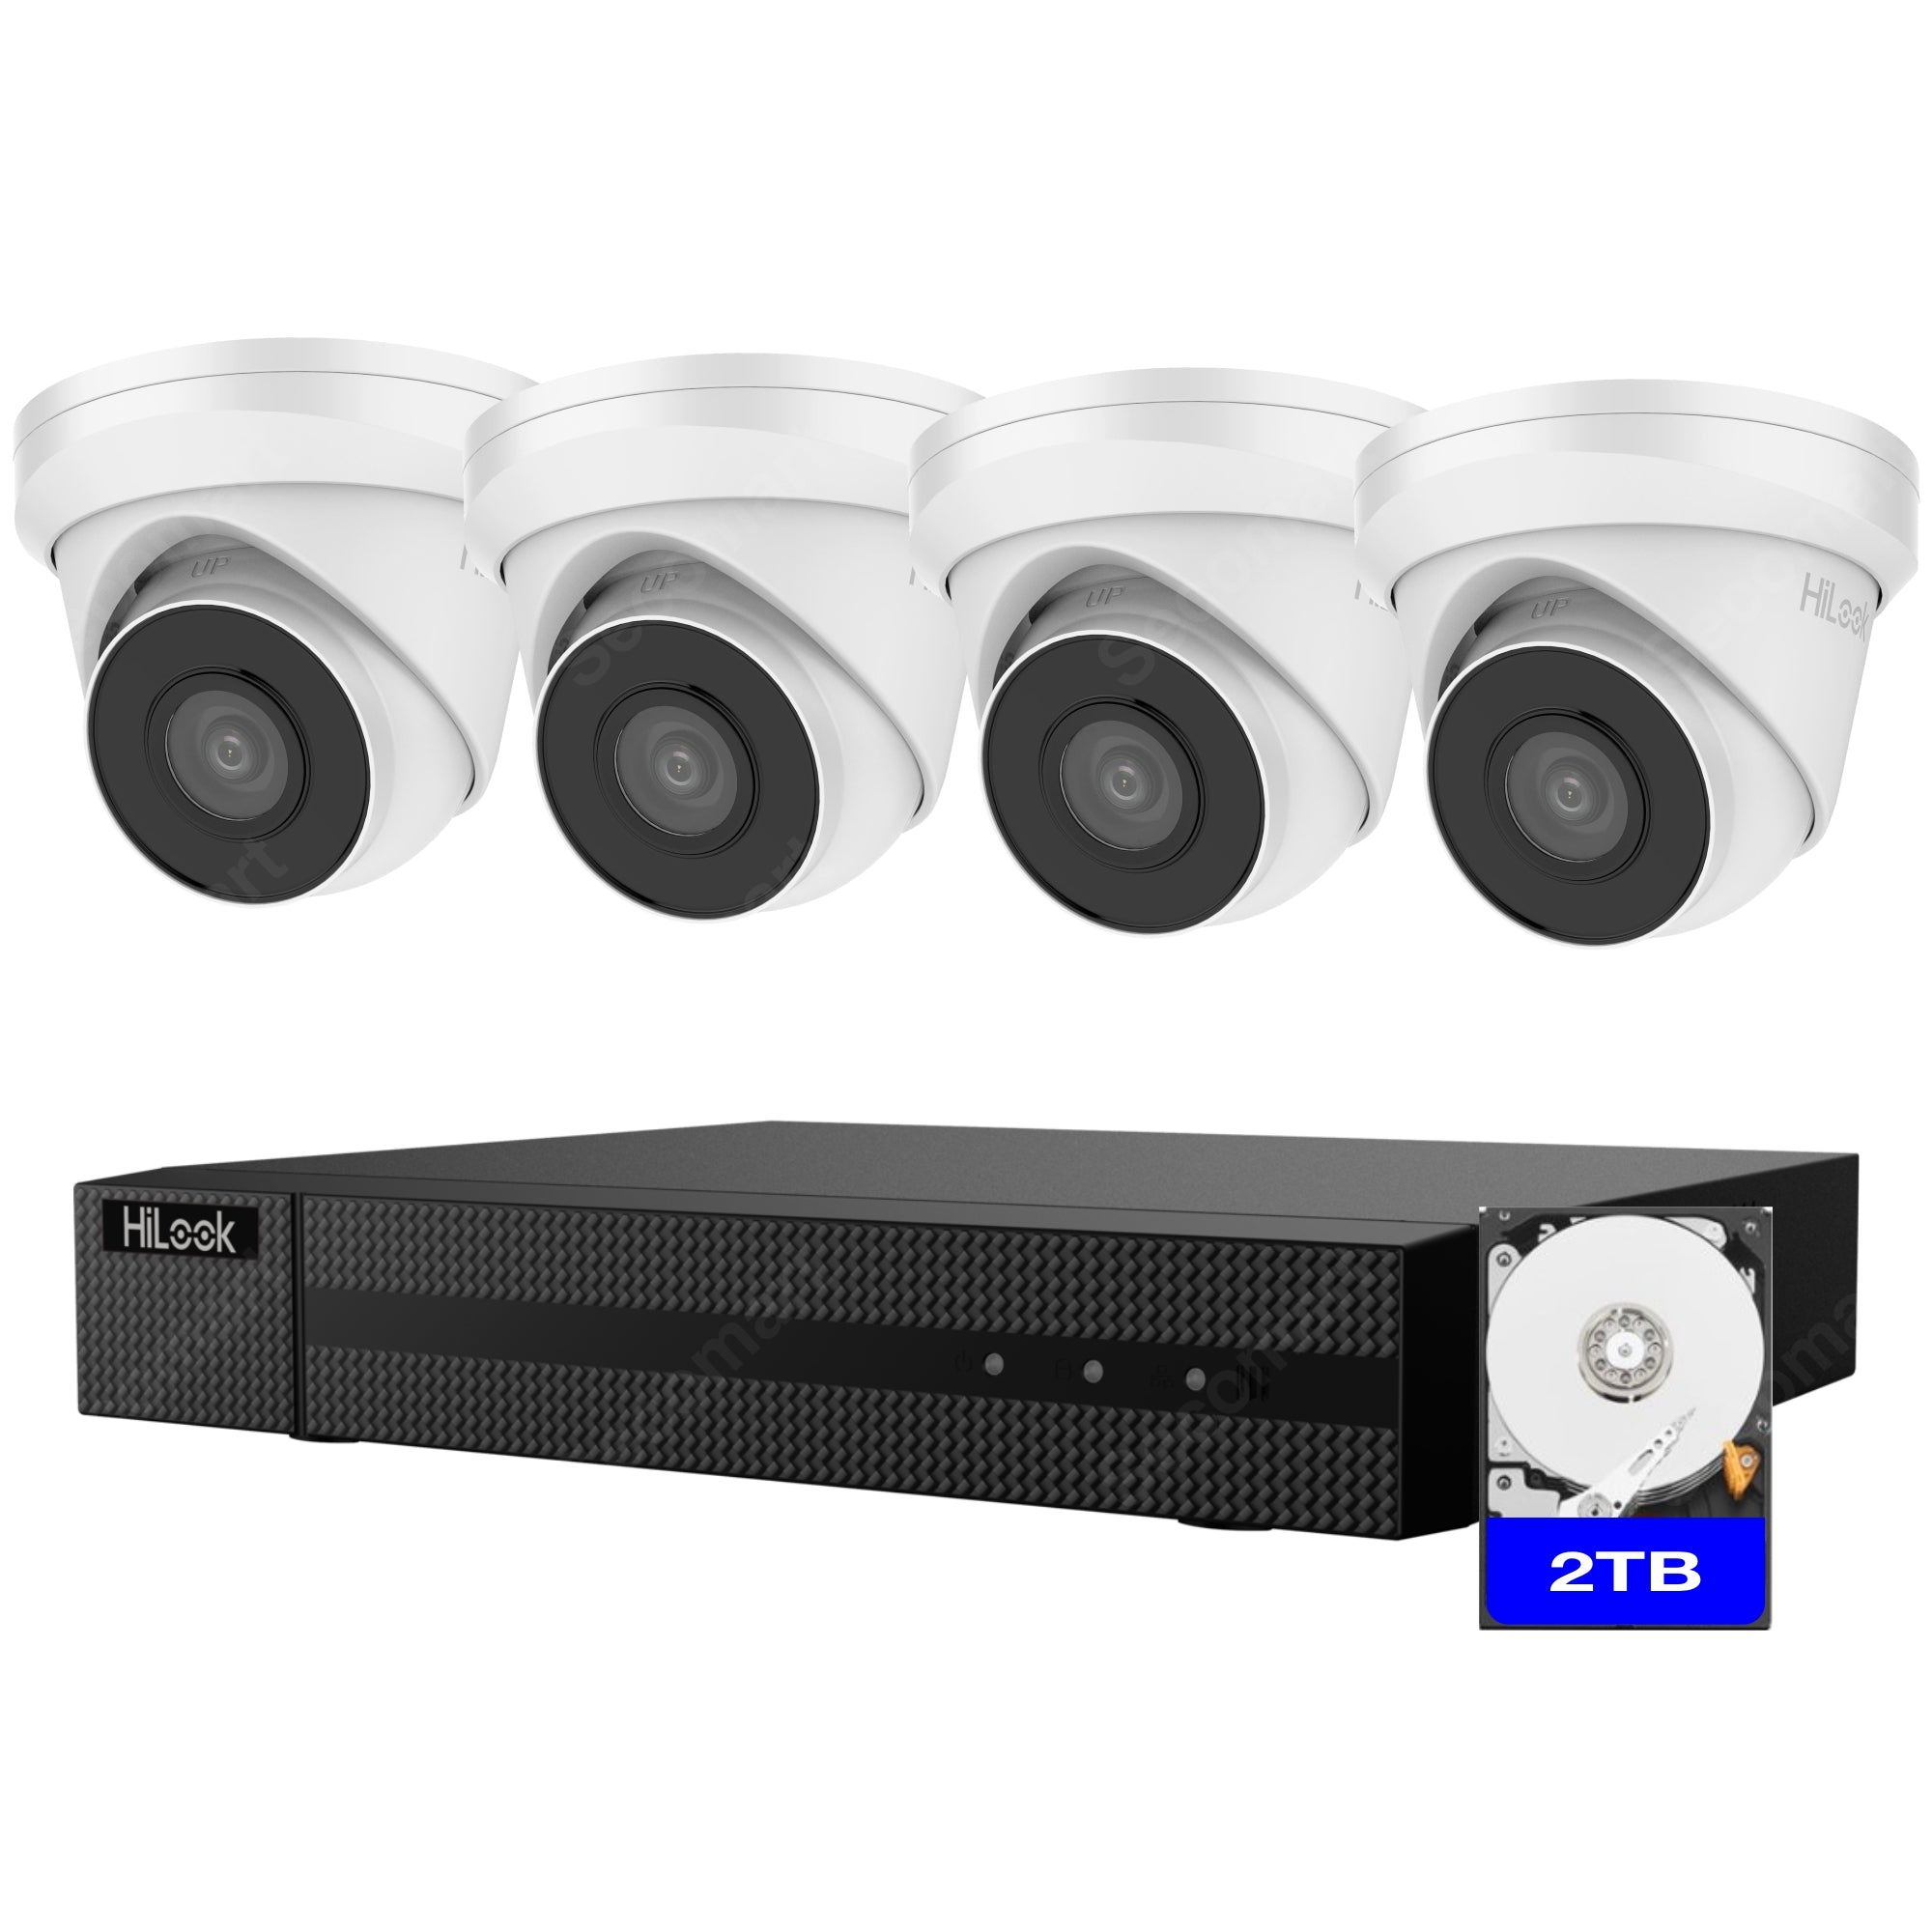 Hilook 4K Security Camera System, 4-Camera PoE NVR Surveillance Kit Outdoor 2TB DIY Wired Turret, Hilook by Hikvision